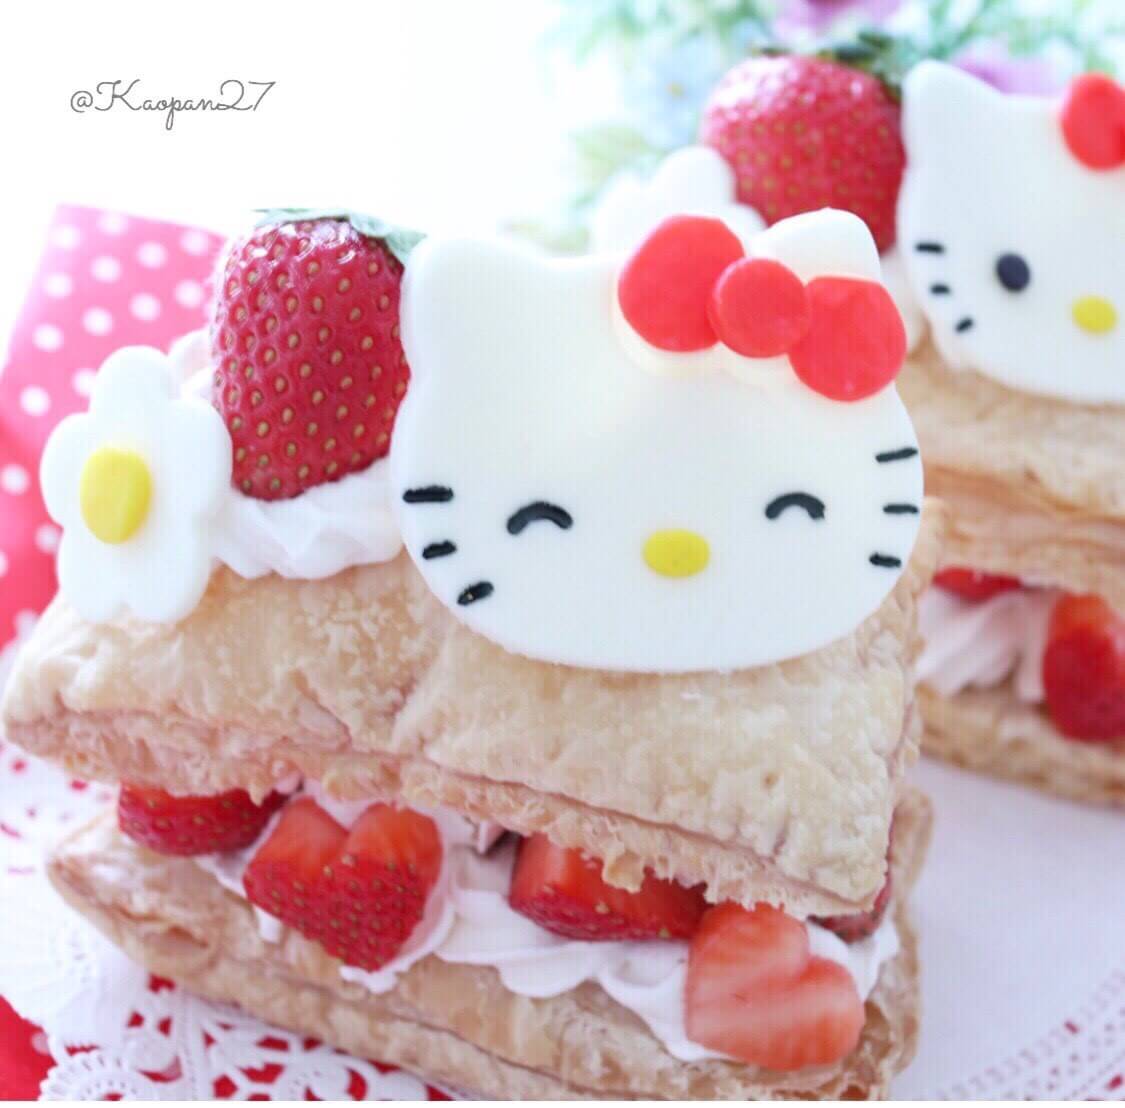 Kaori’s Easy Recipe – Learn how to make “Hello Kitty mille-feuille”